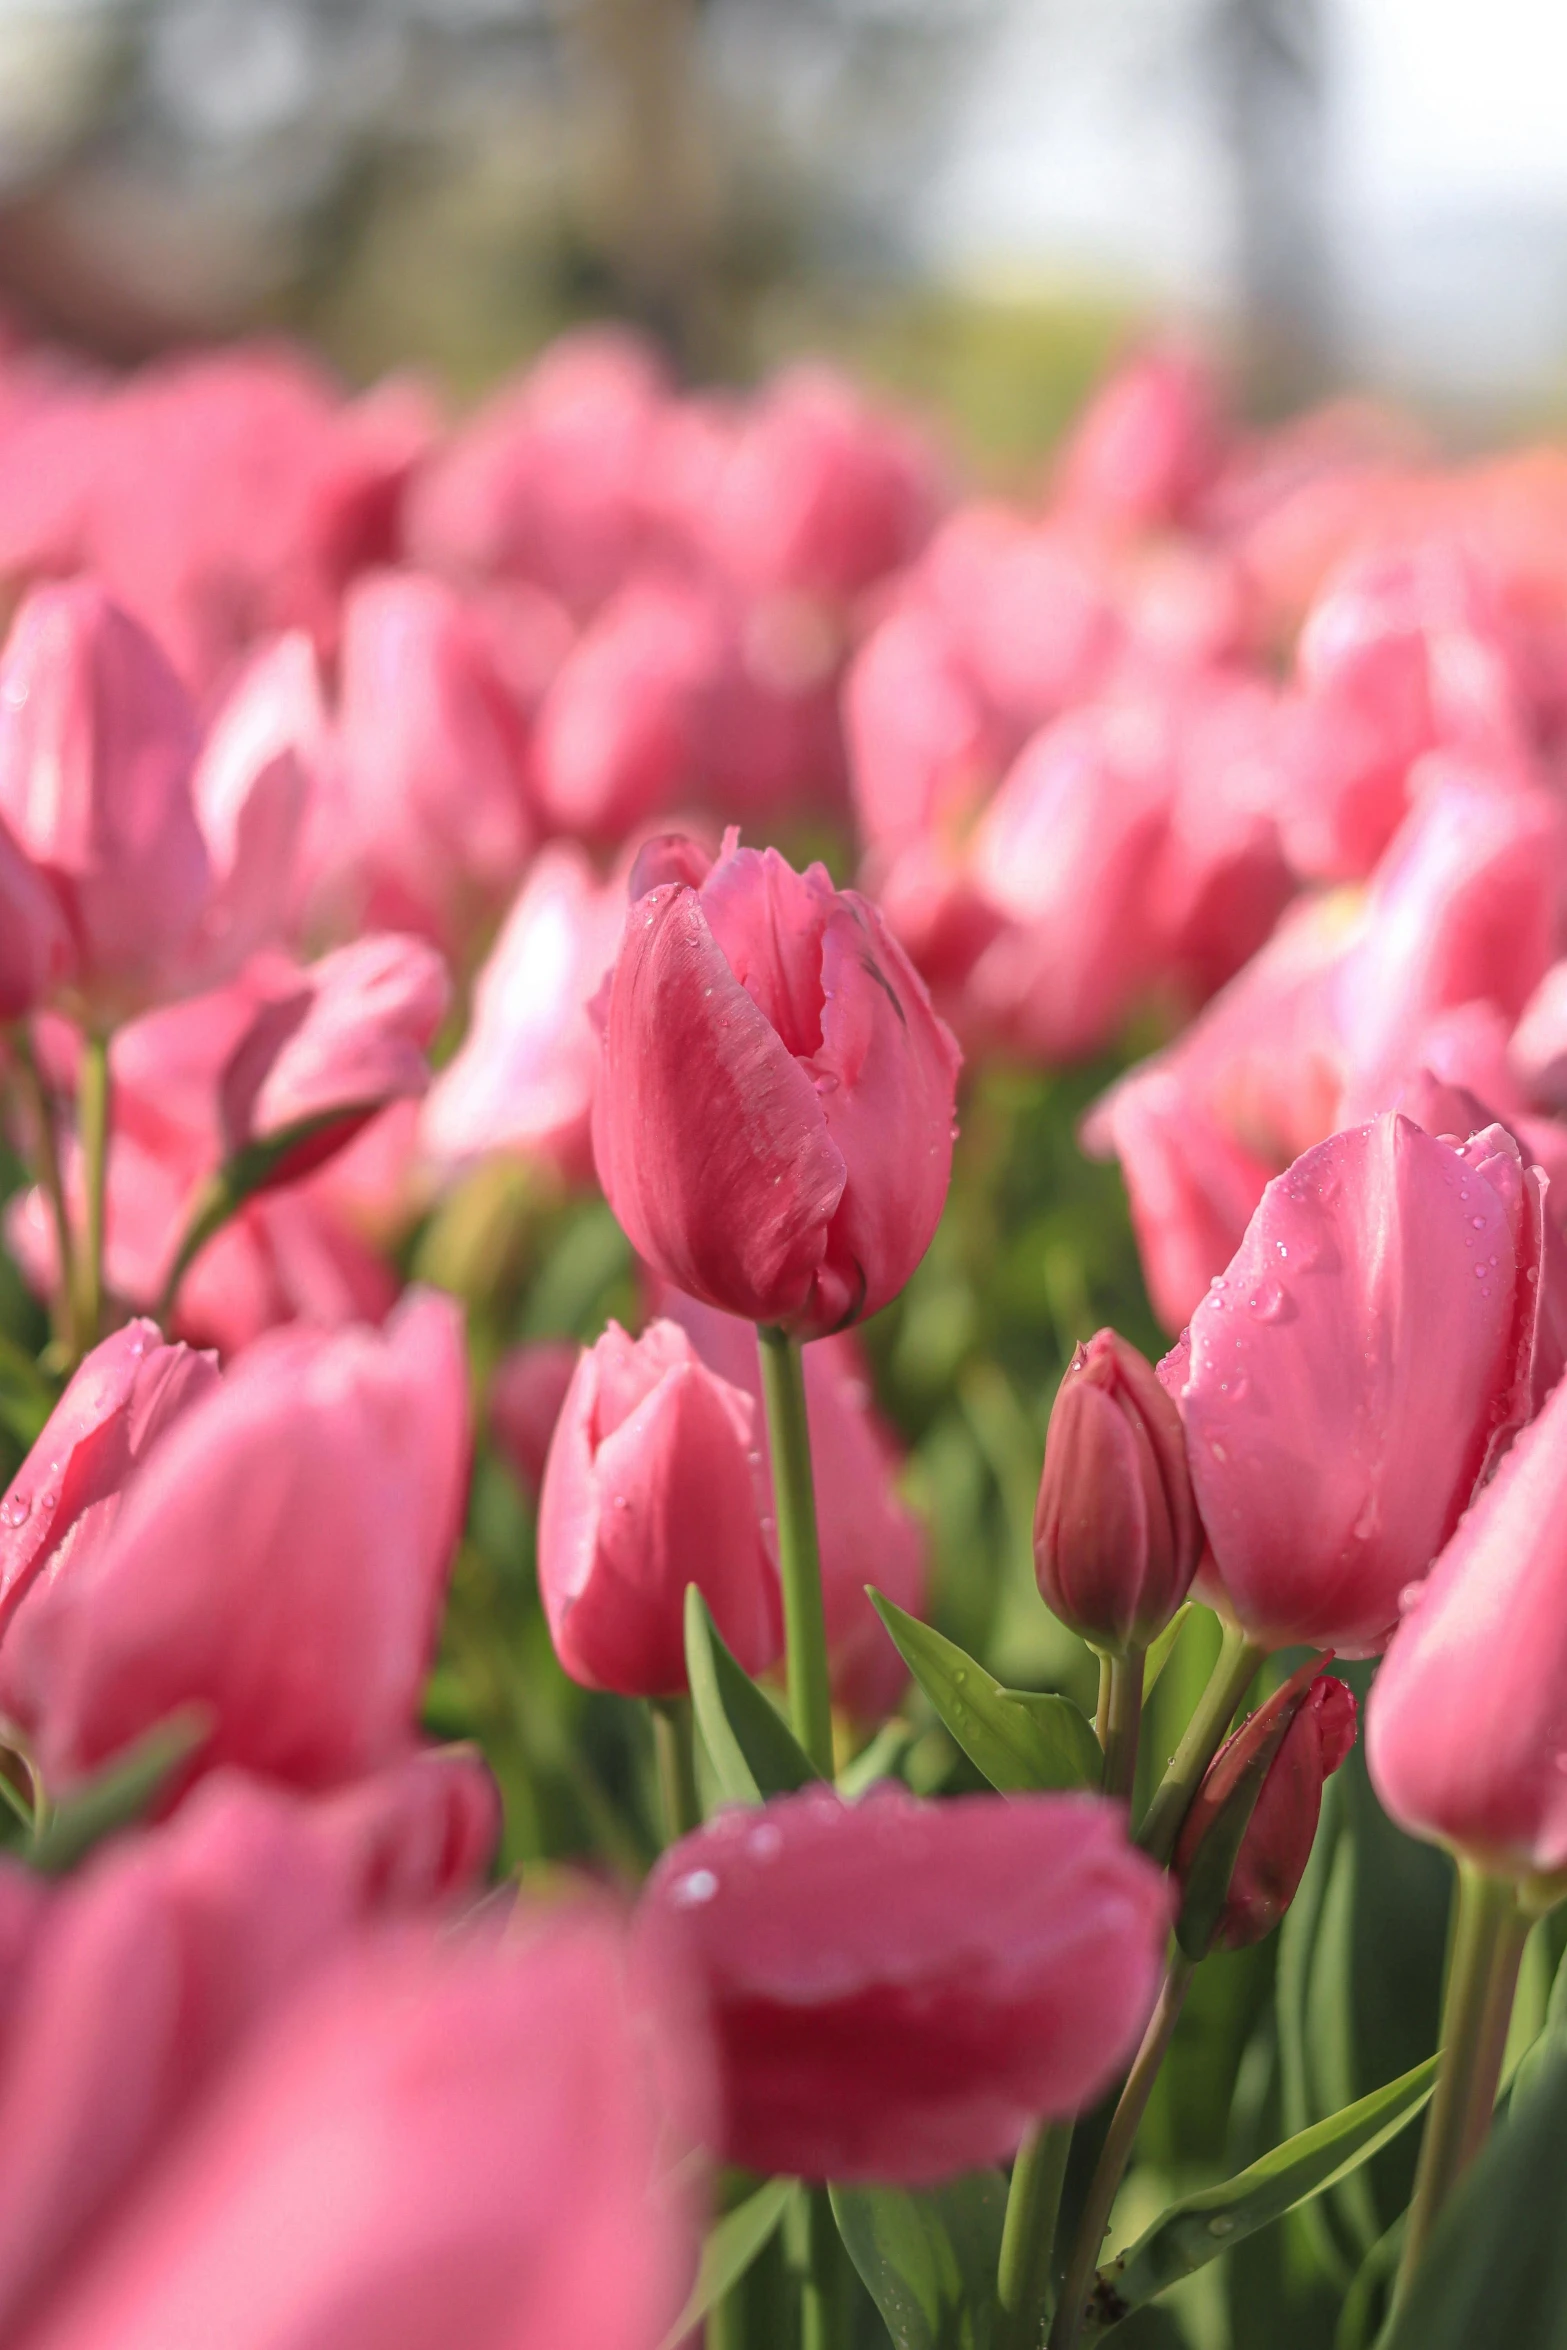 pink tulips are blooming in a field